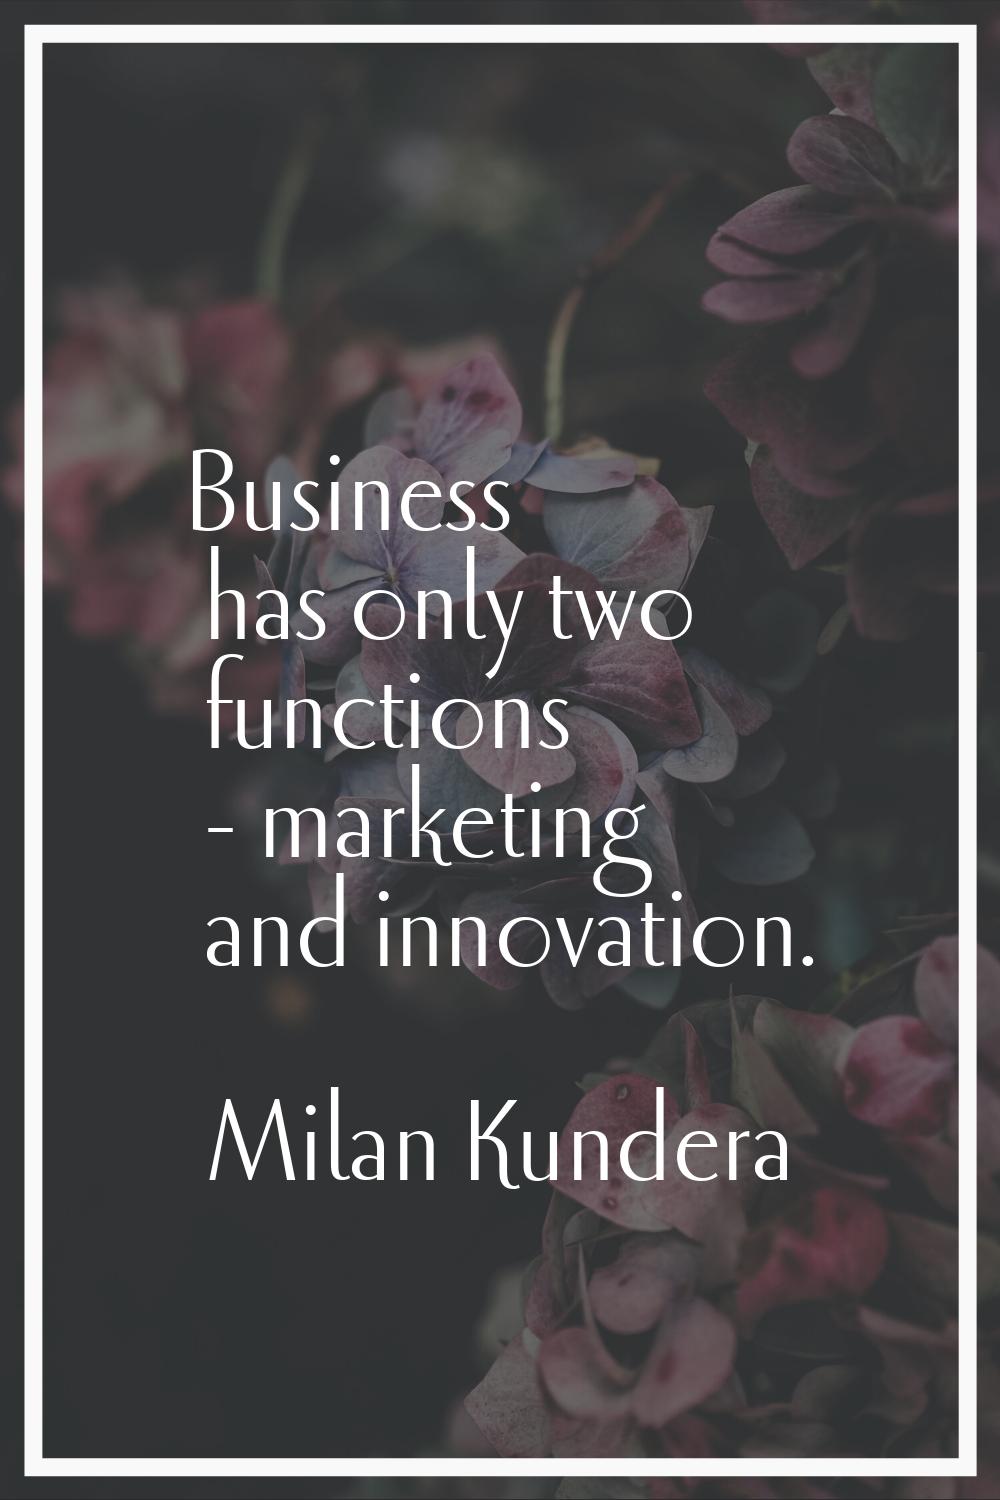 Business has only two functions - marketing and innovation.